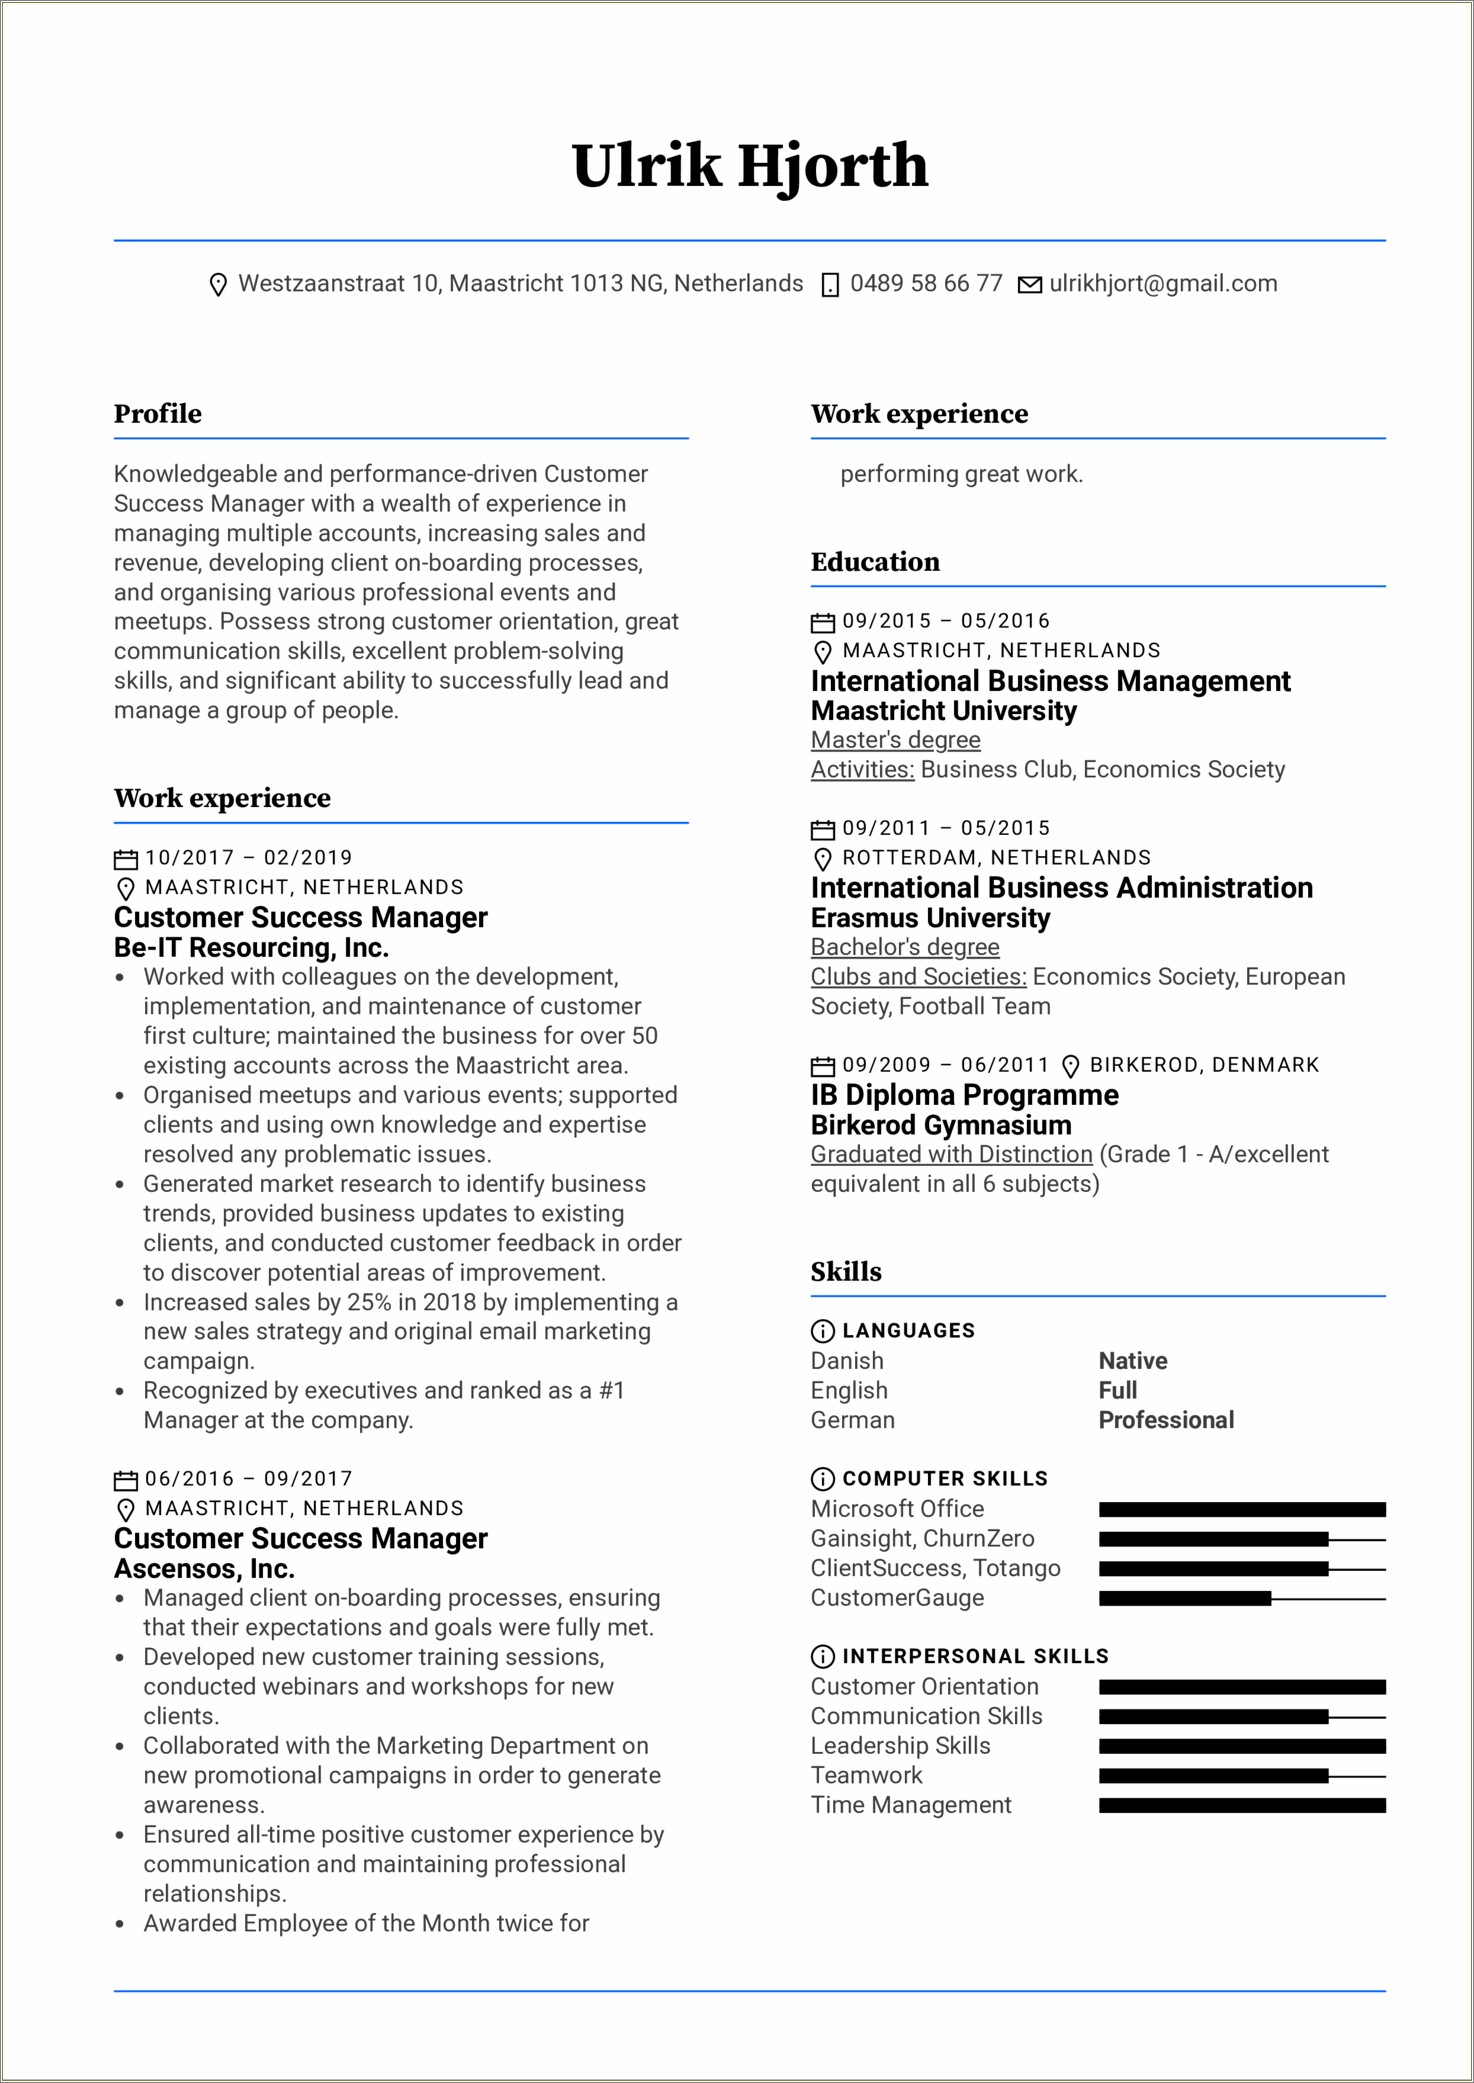 Objective Examples On Resume For Office Managment